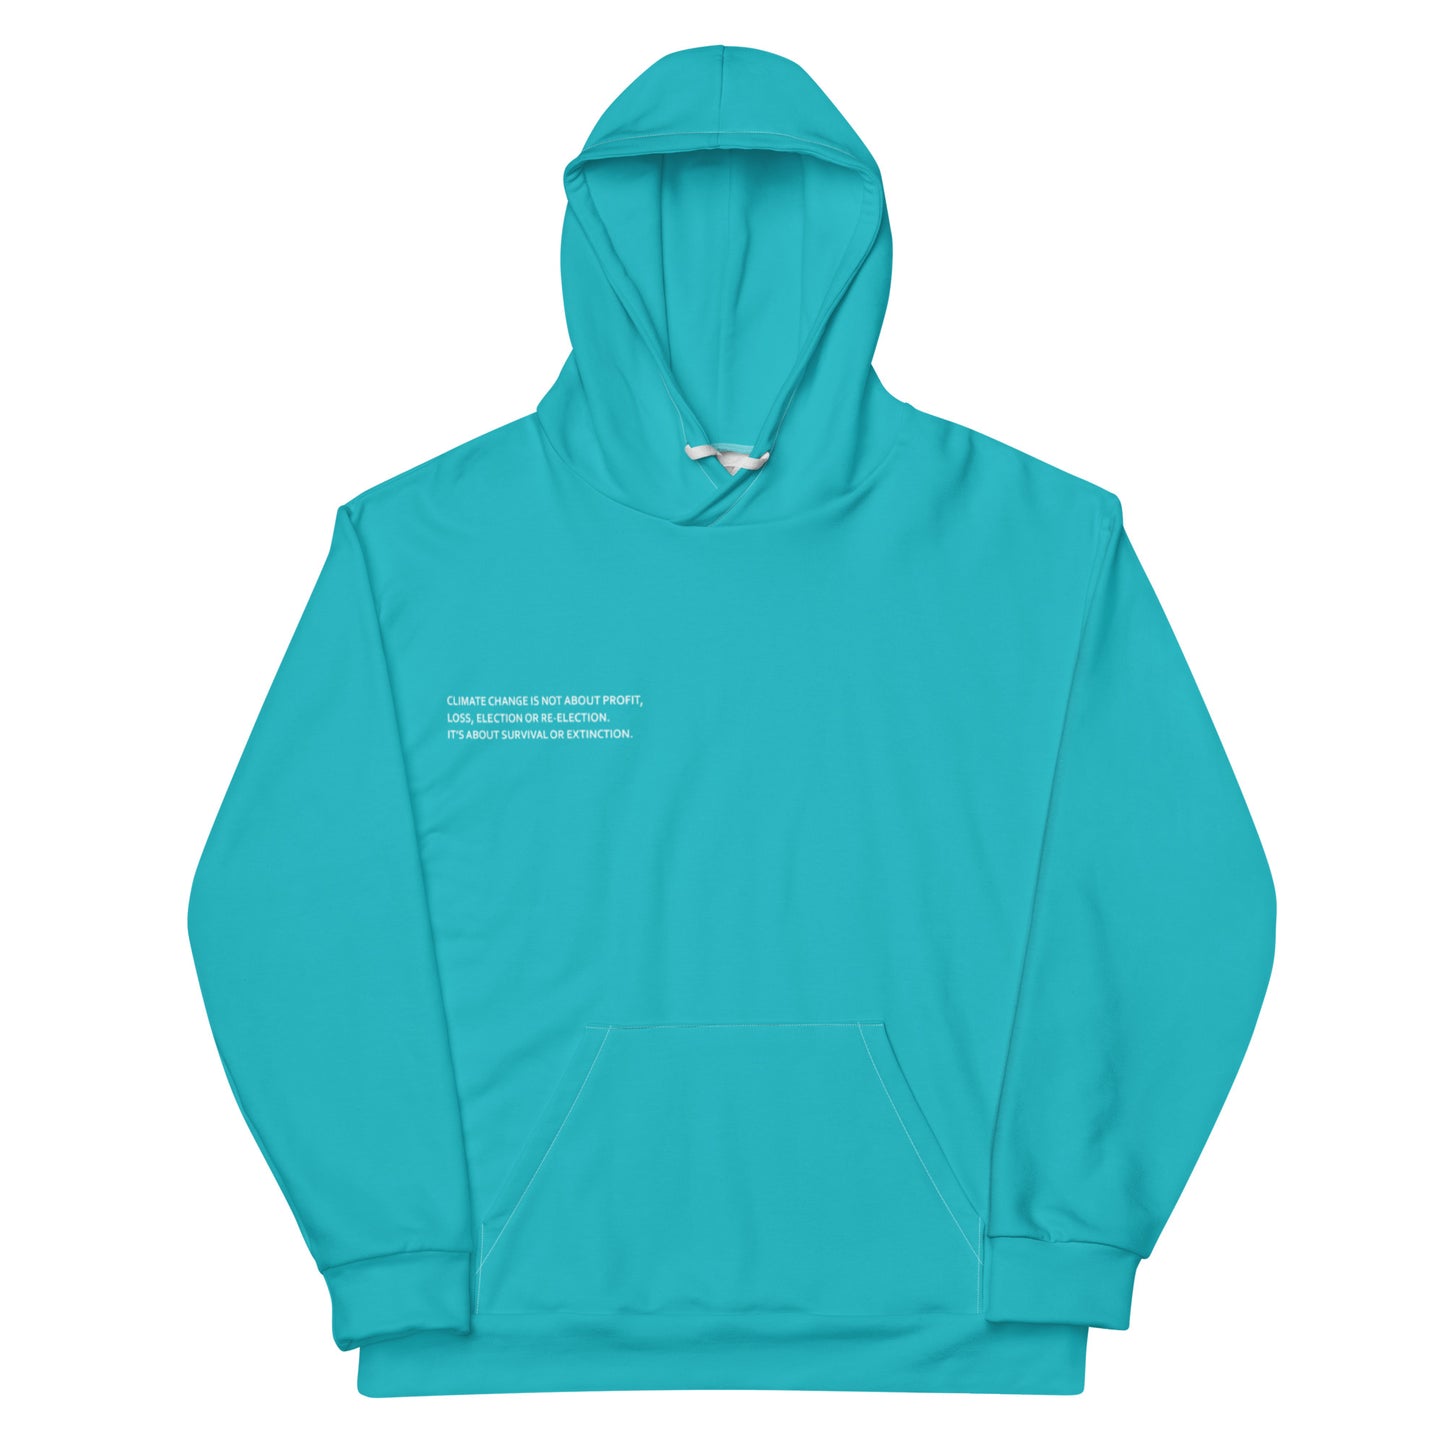 Cyan Climate Change Global Warming Statement - Sustainably Made Hoodie